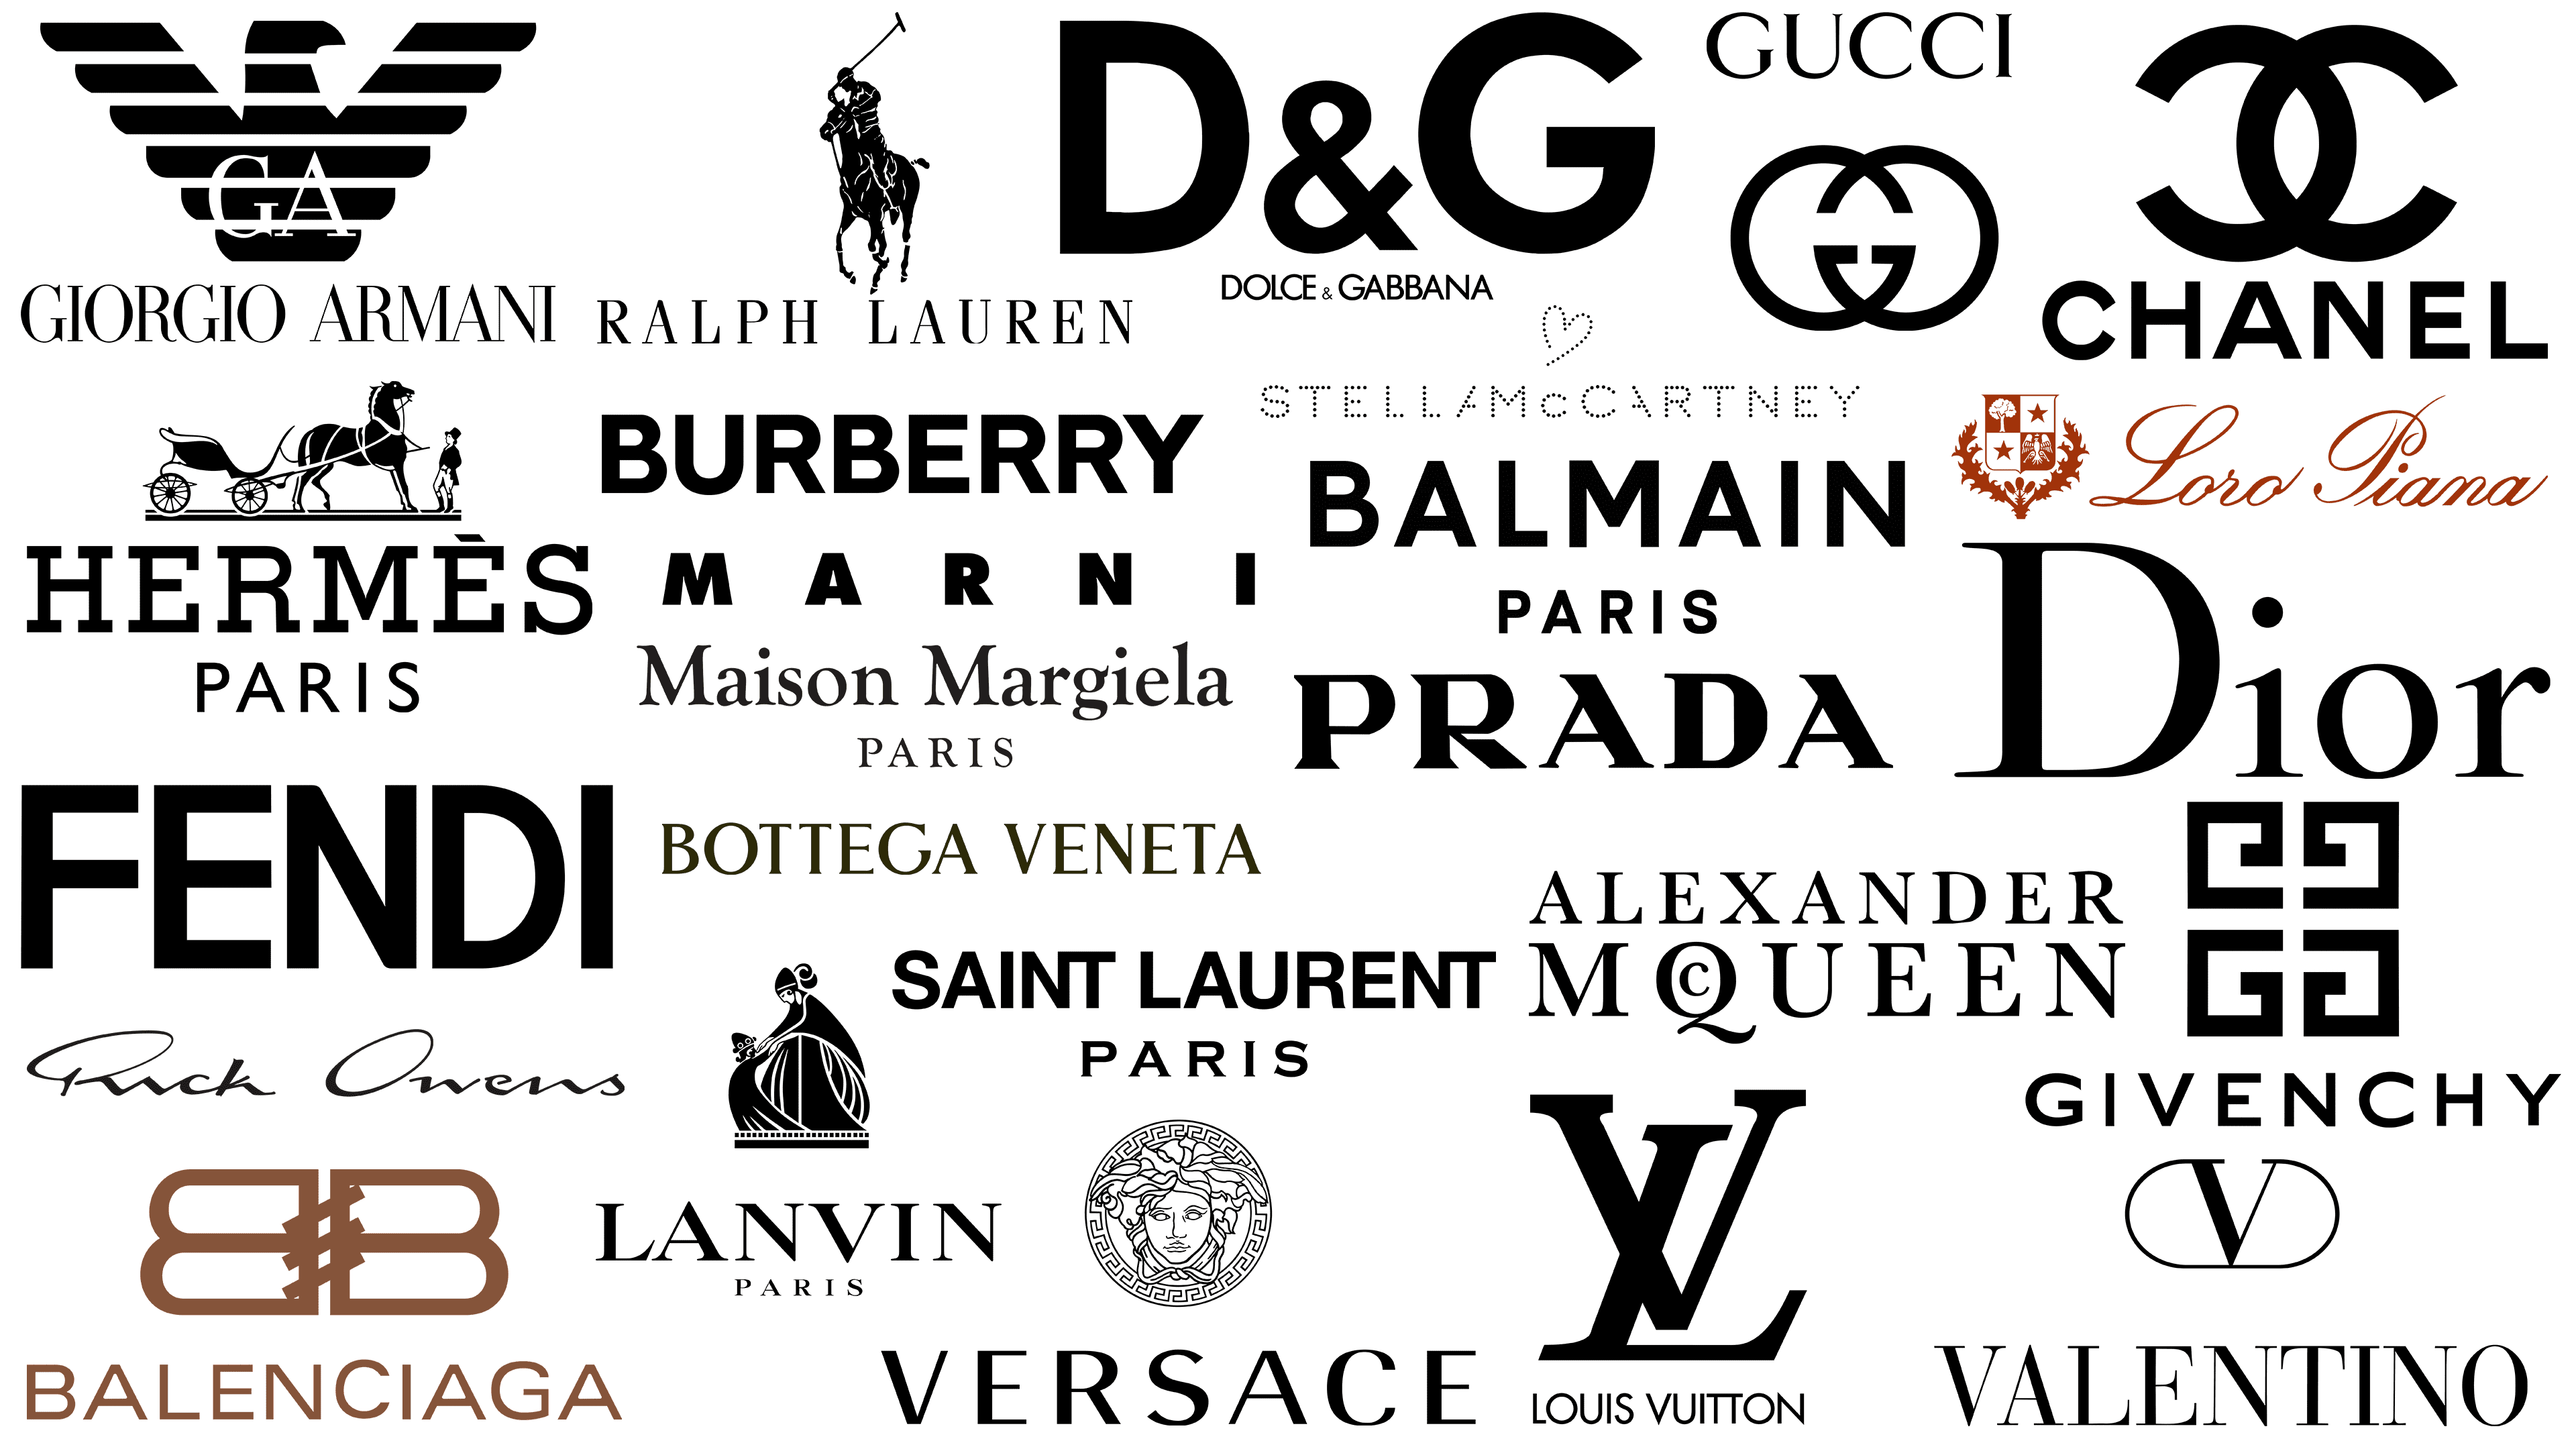 Louis Vuitton, Gucci most searched for luxury brands in 2023